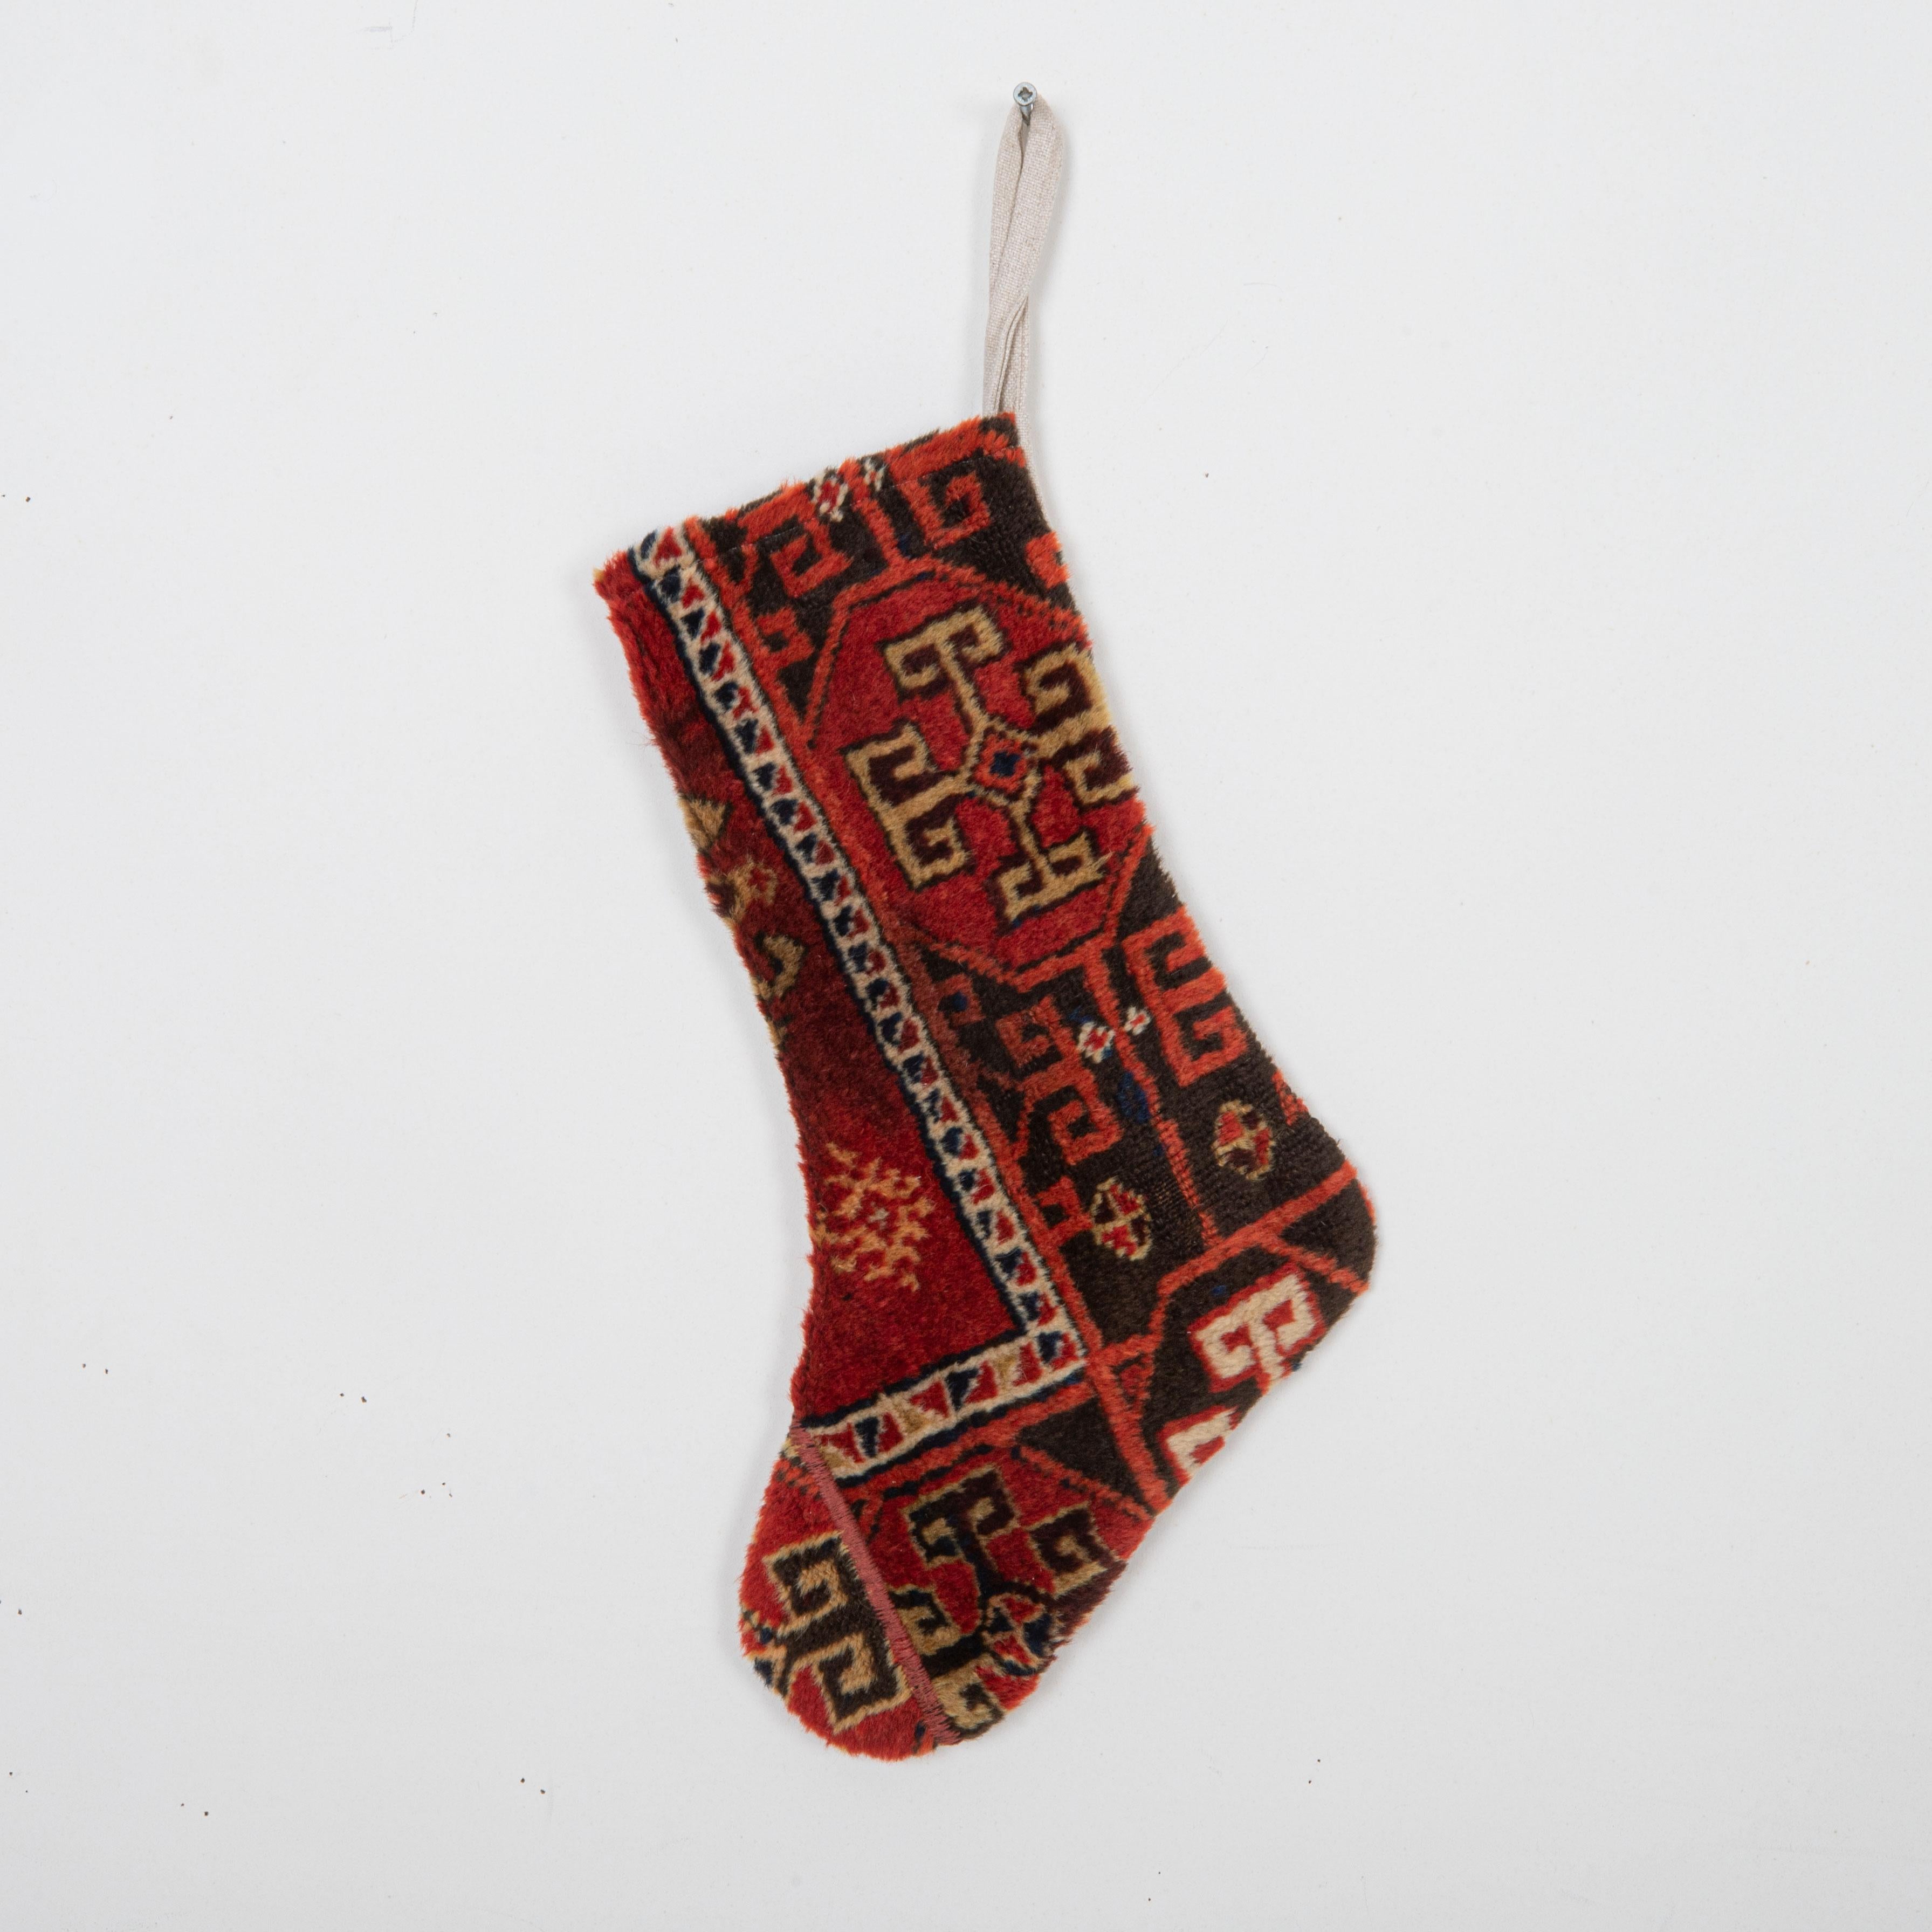 This Christmas Stocking was made from a late 19th or Early 20th C. Anatolian rug fragments.
Linen in the back.

Please note, this stocking was made from Anatolian rug fragments.
